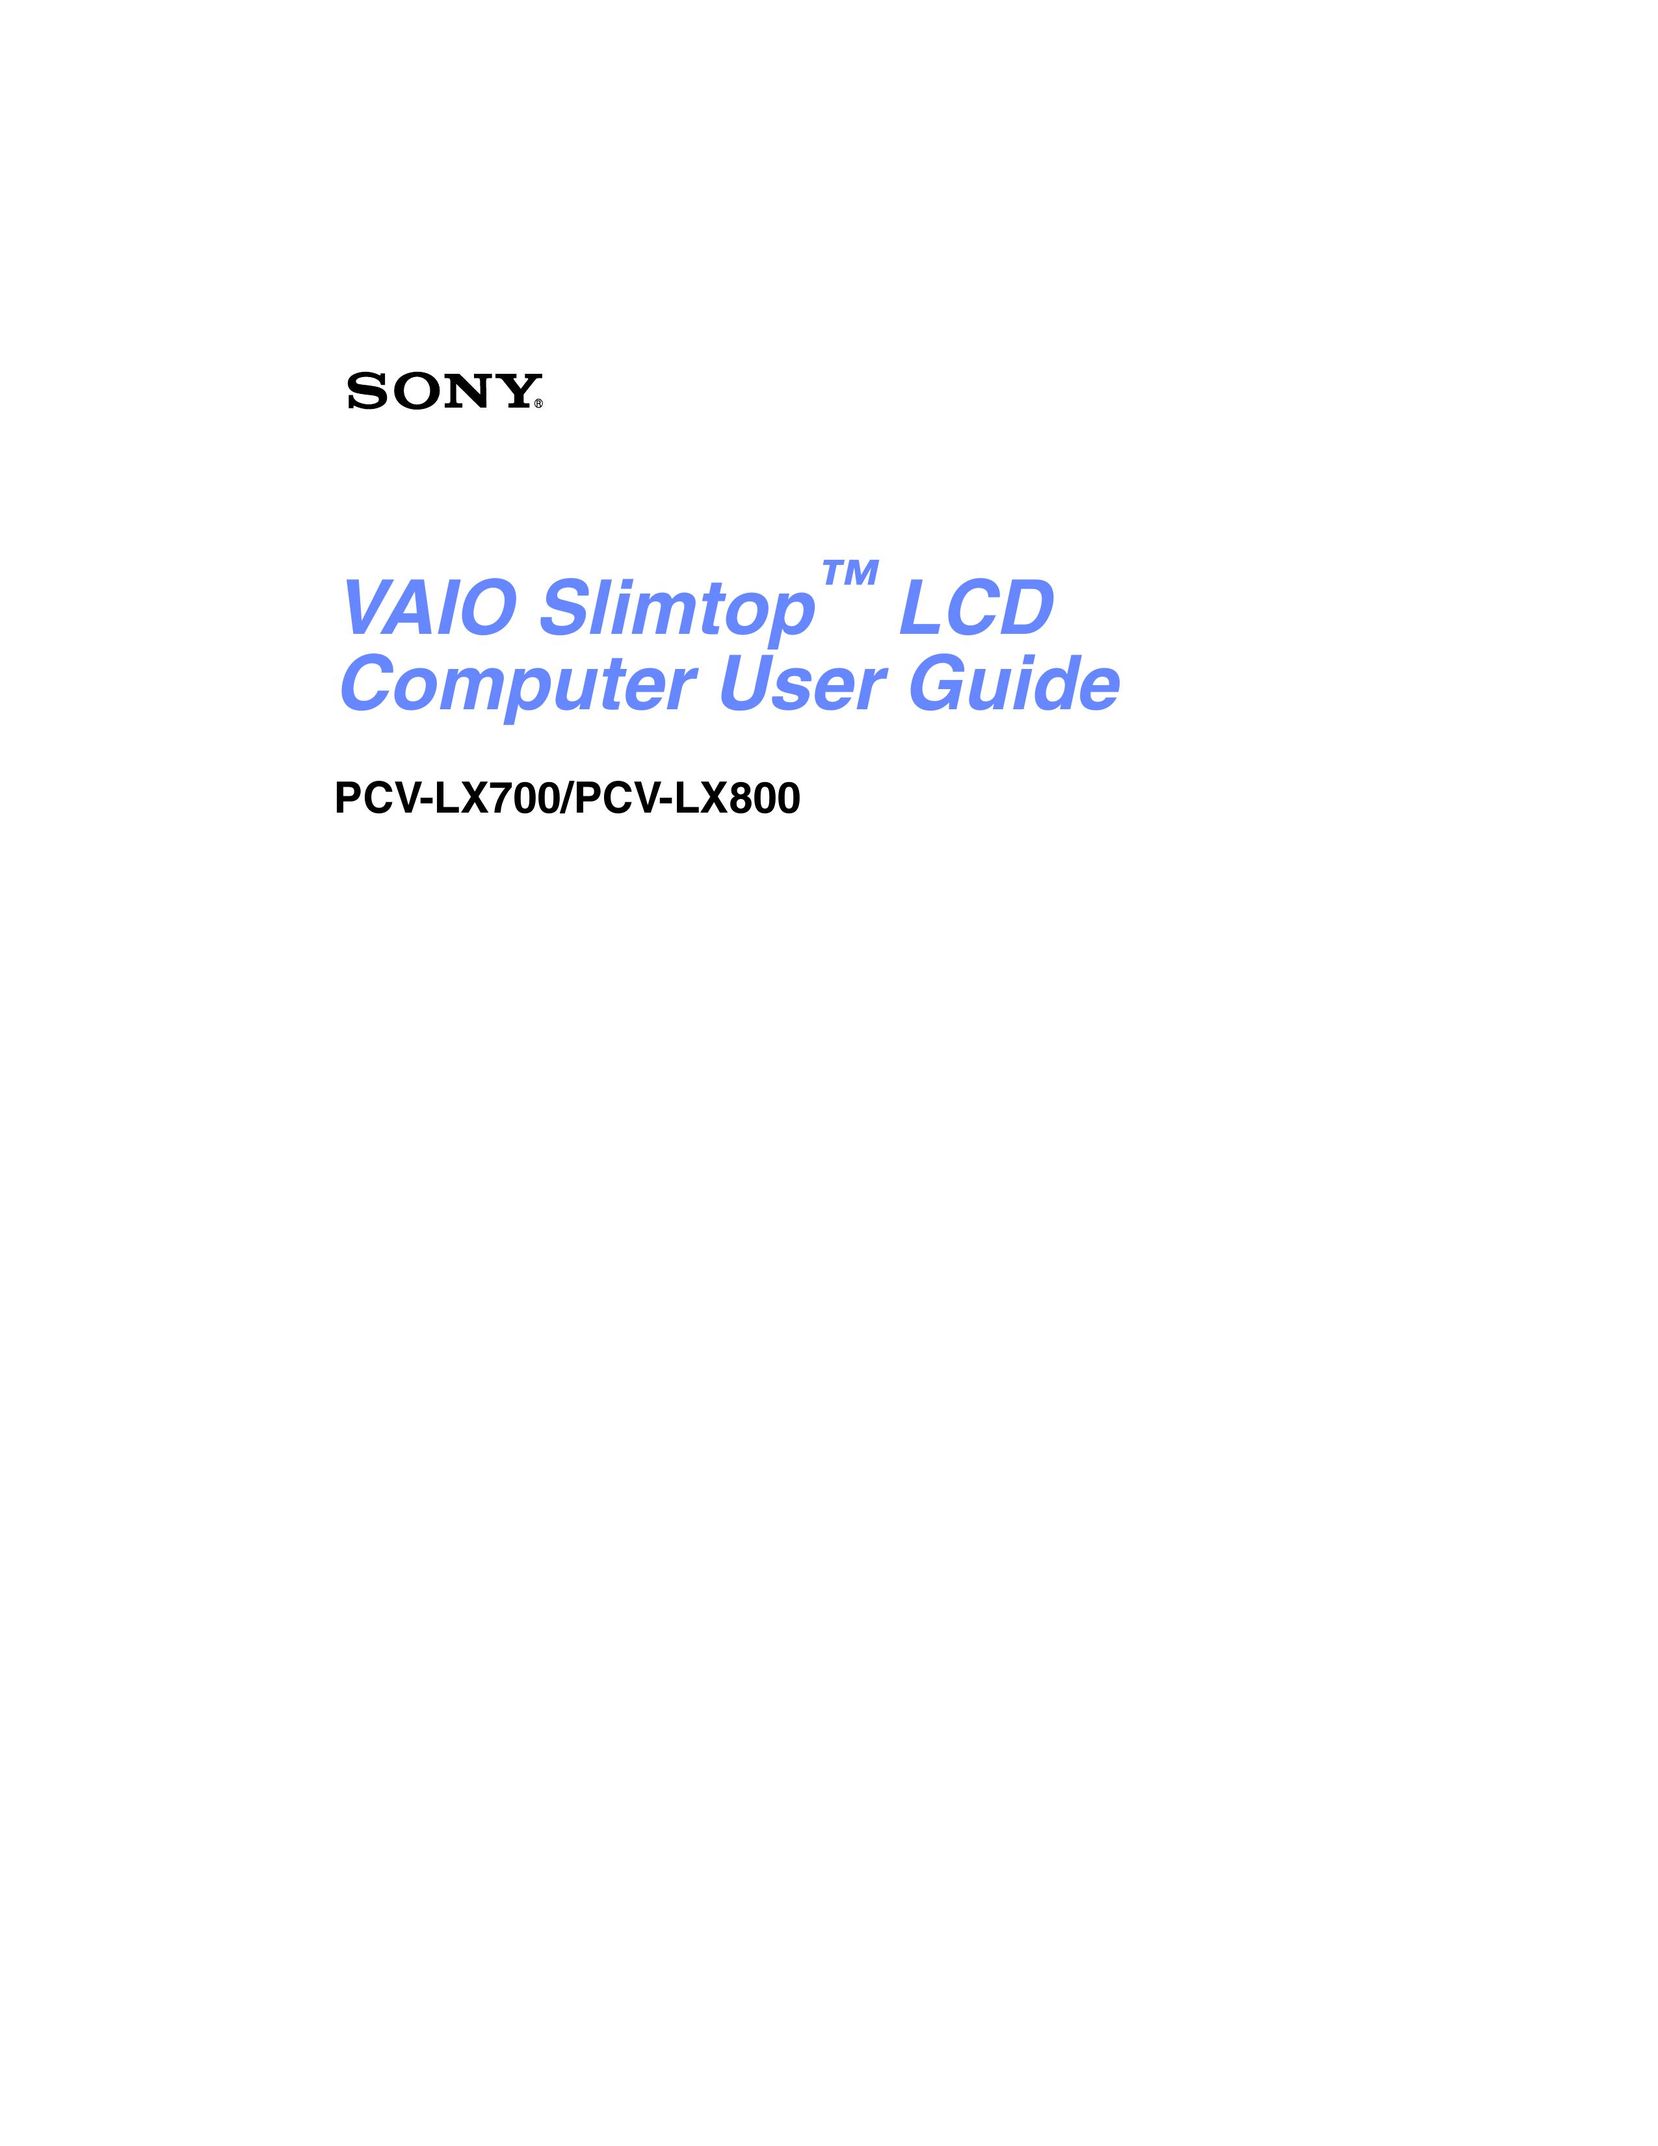 Sony PCV-LX700 Personal Computer User Manual